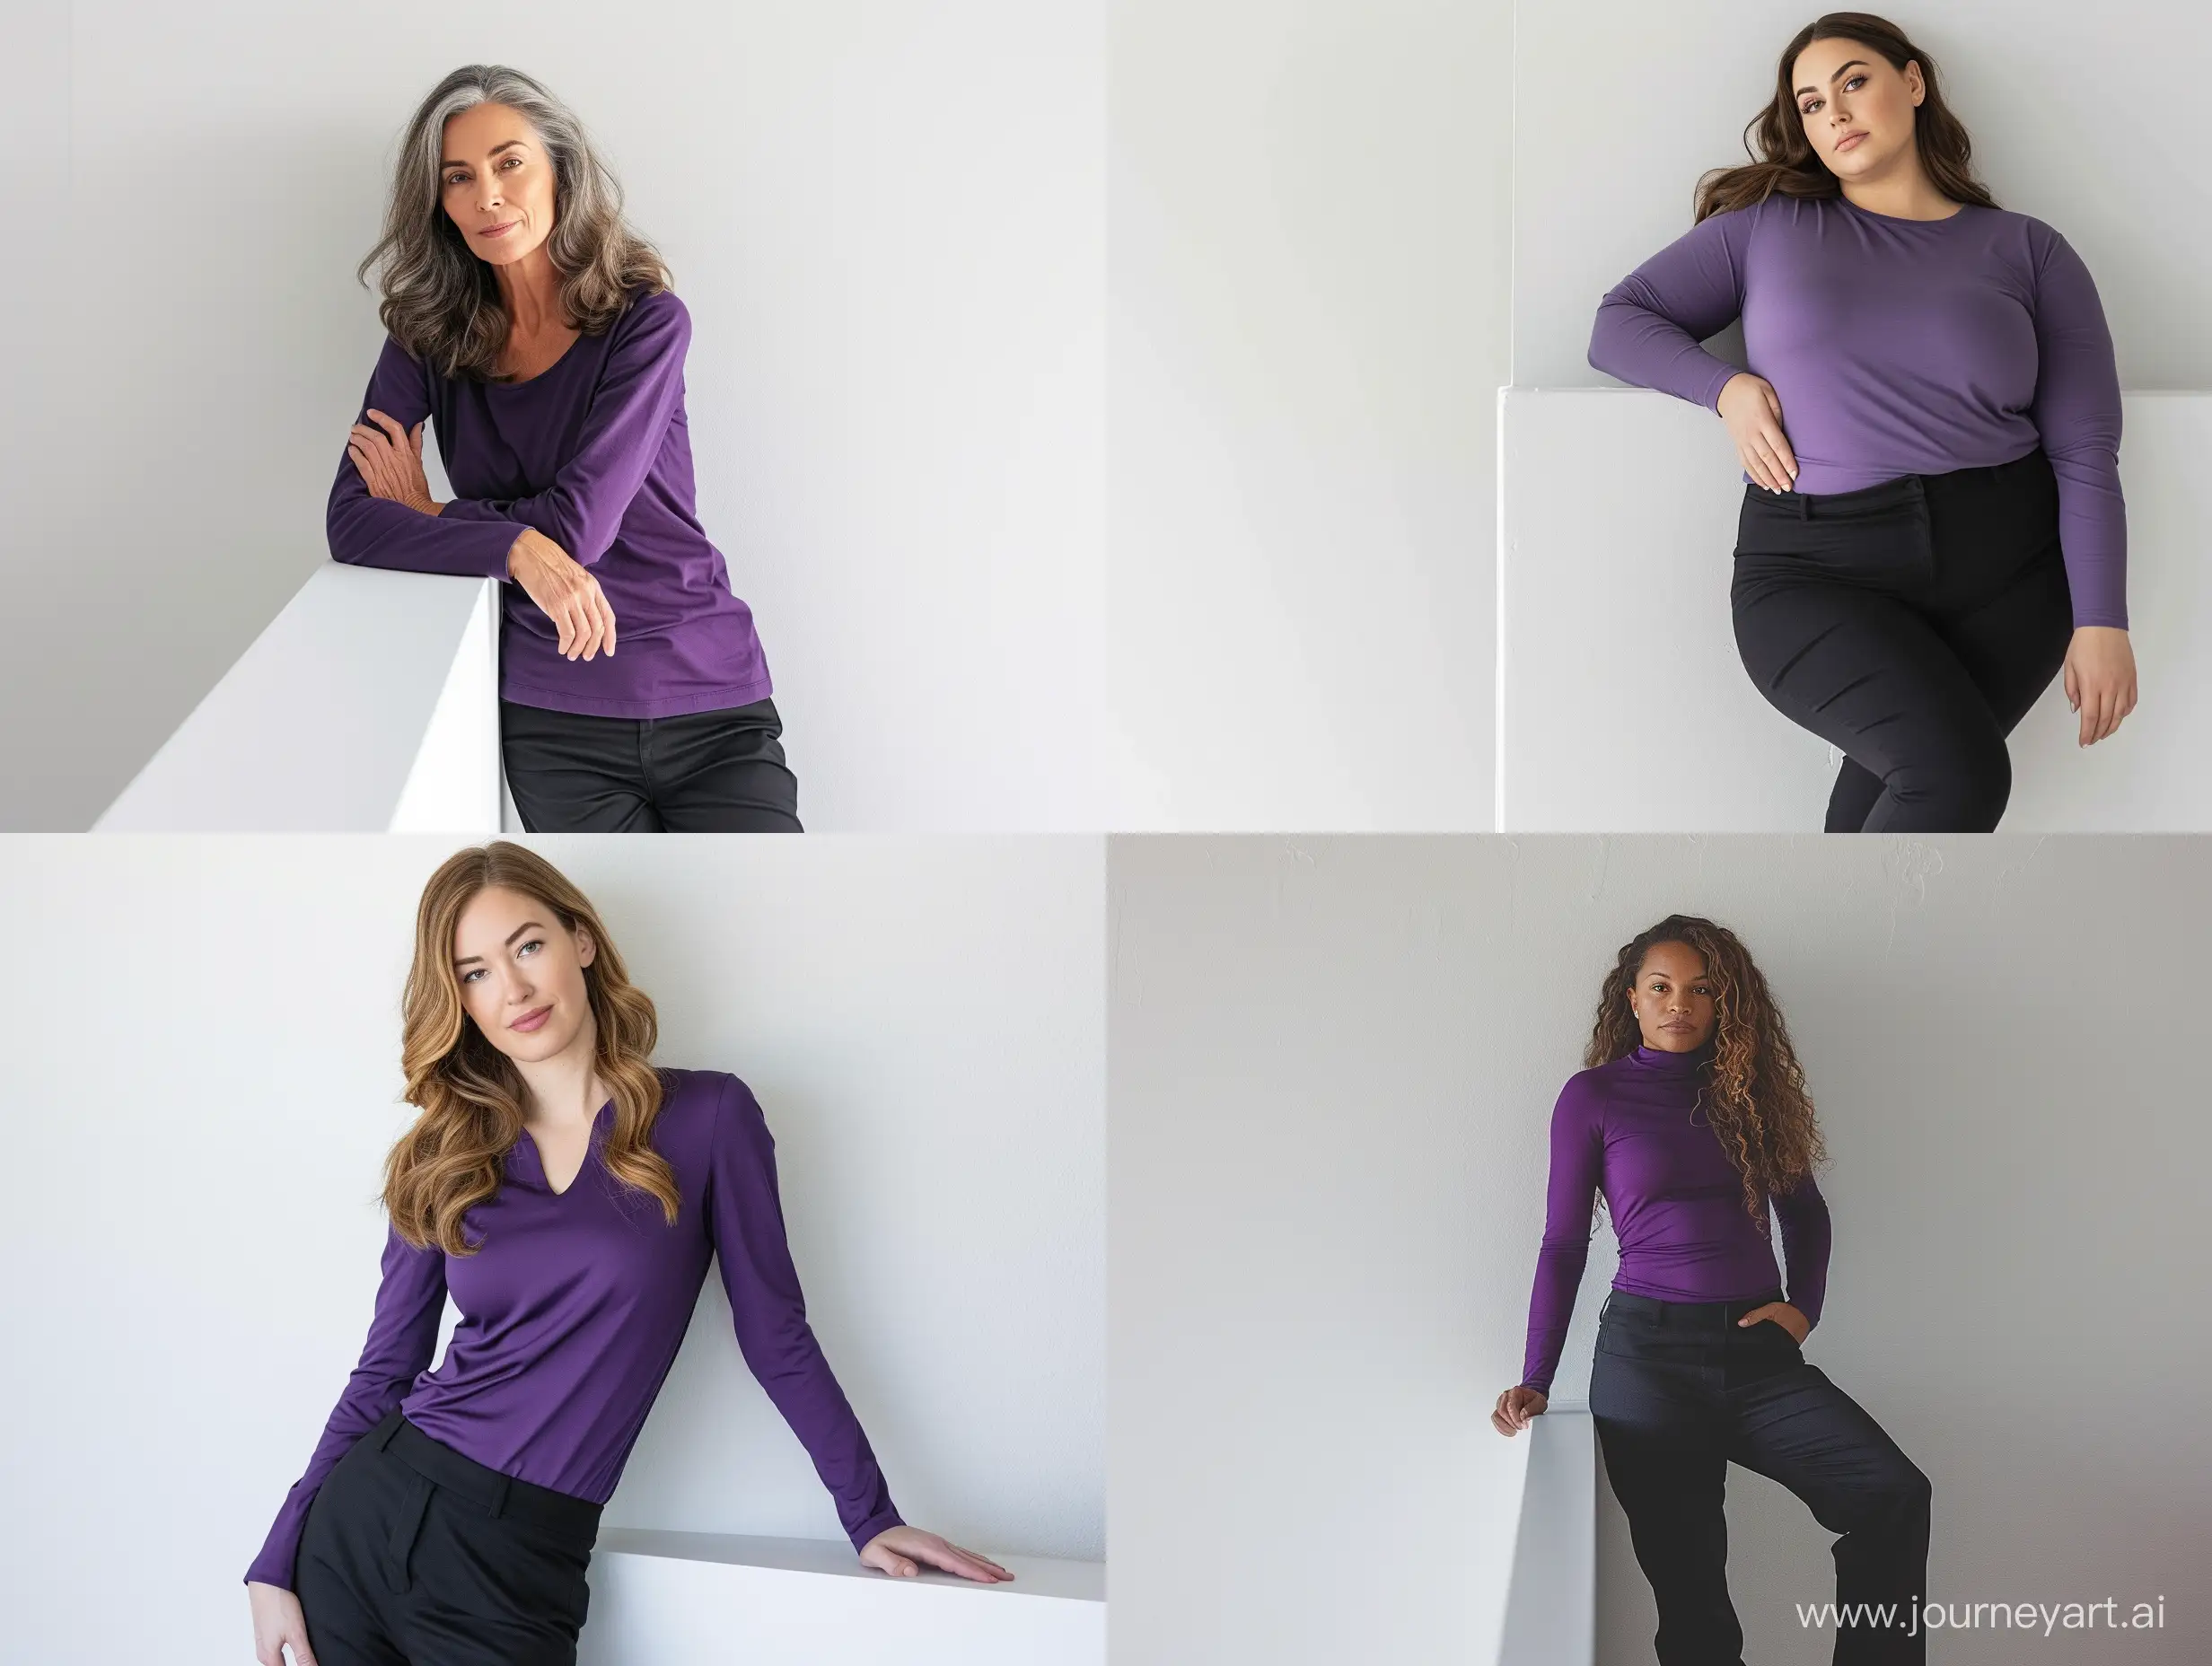 women in purple long sleeve shirt and black pants leaning on white wall portrait